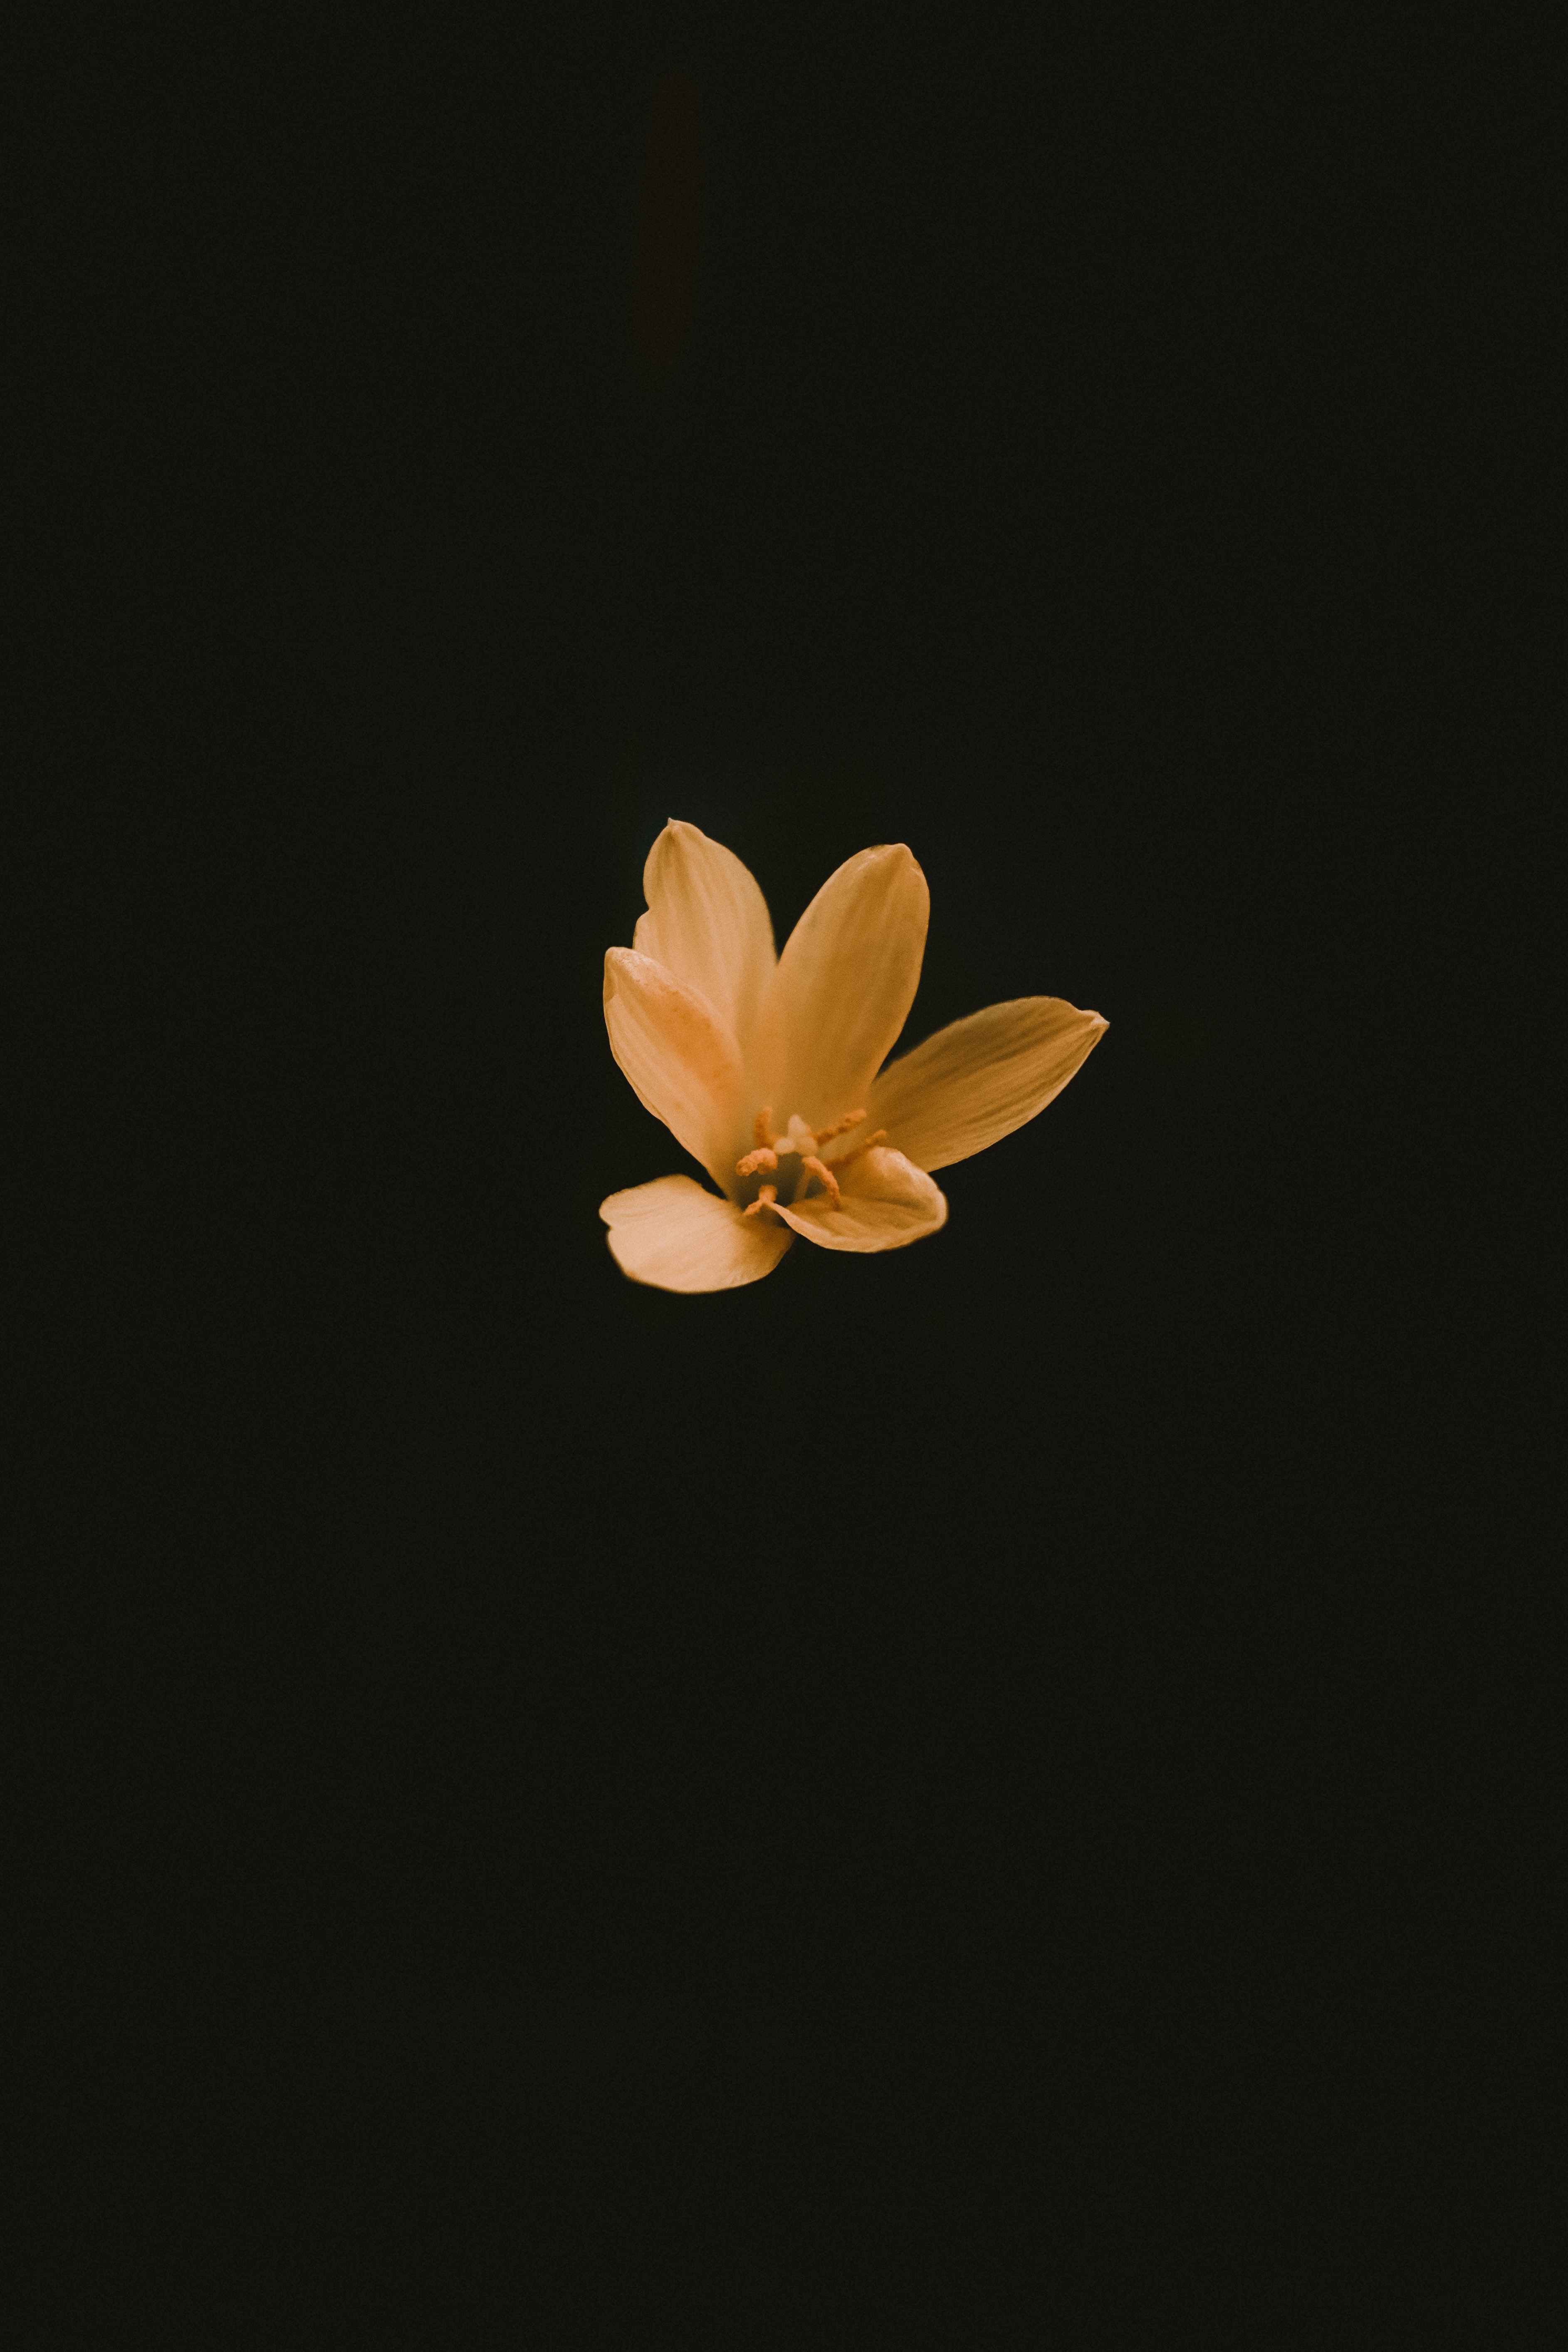 A Yellow Flower With A Black Background 